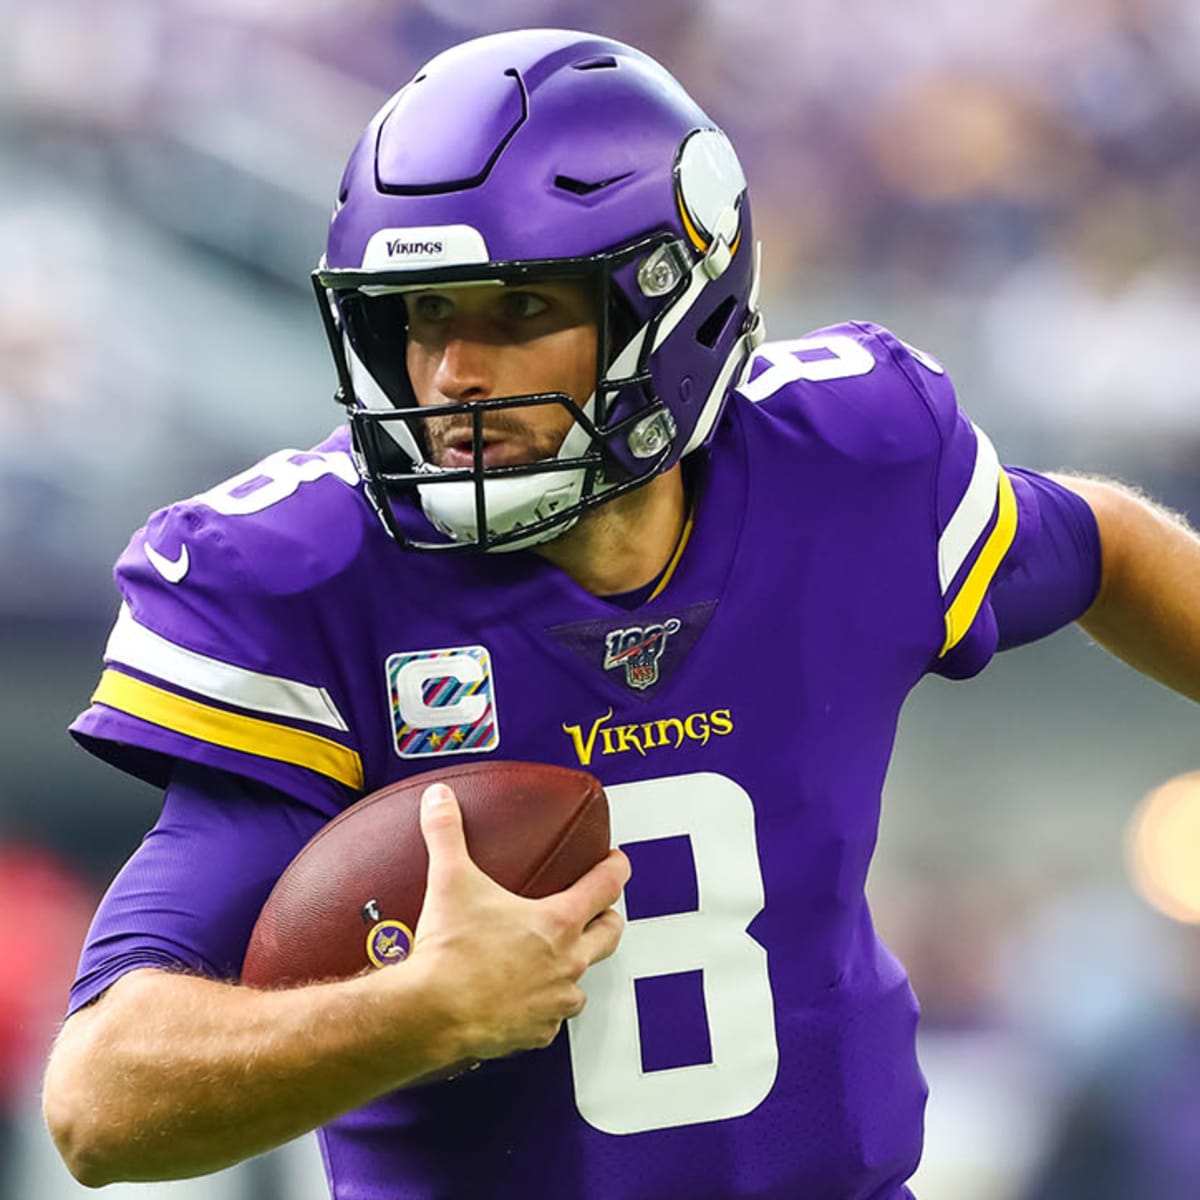 Vikings vs Lions live stream Watch online, TV channel, time